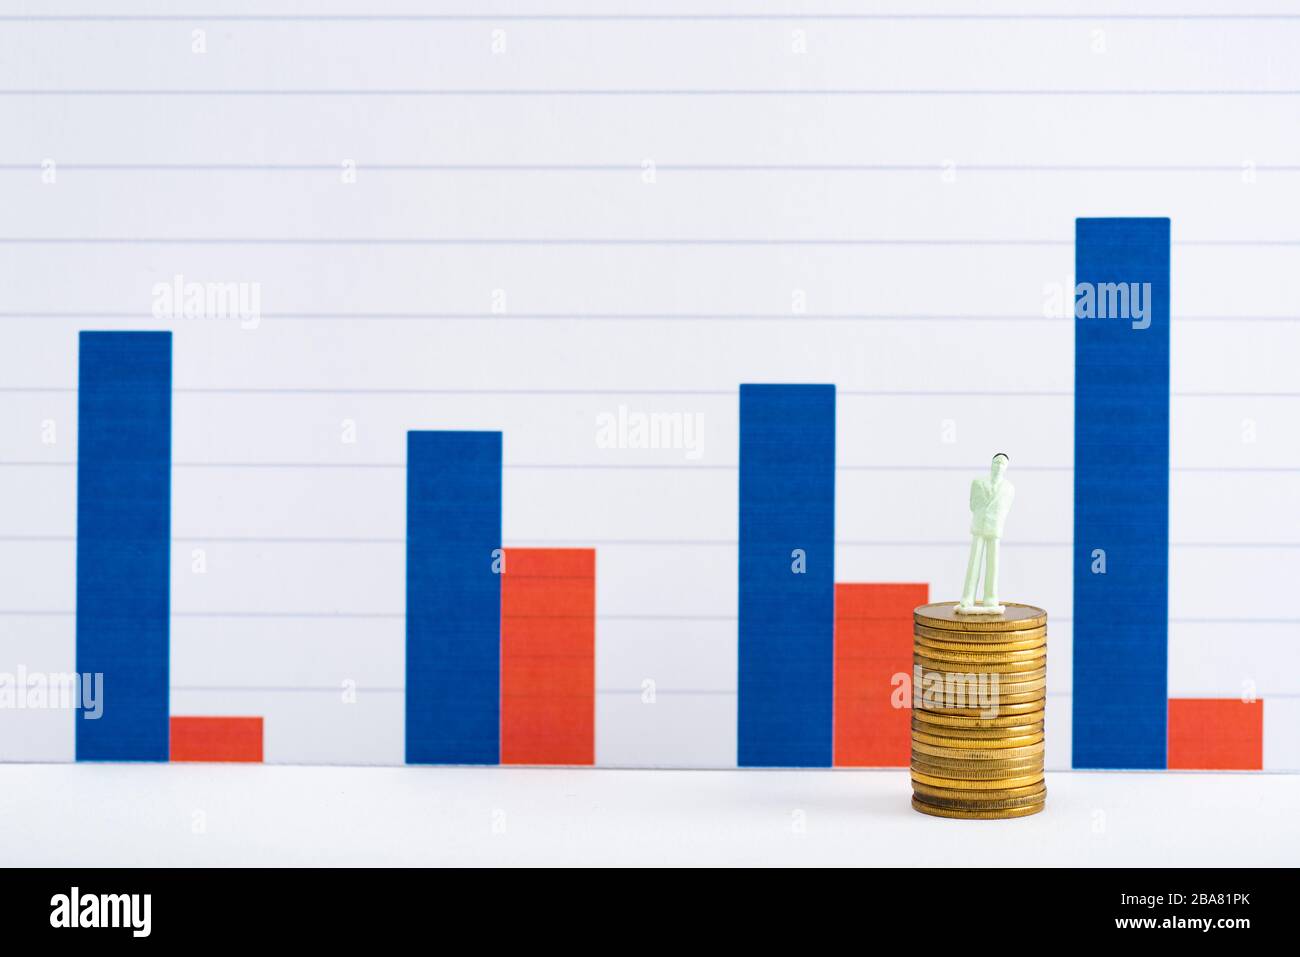 People figure on golden coins on white surface with blue and red graphs at background, concept of financial equality Stock Photo